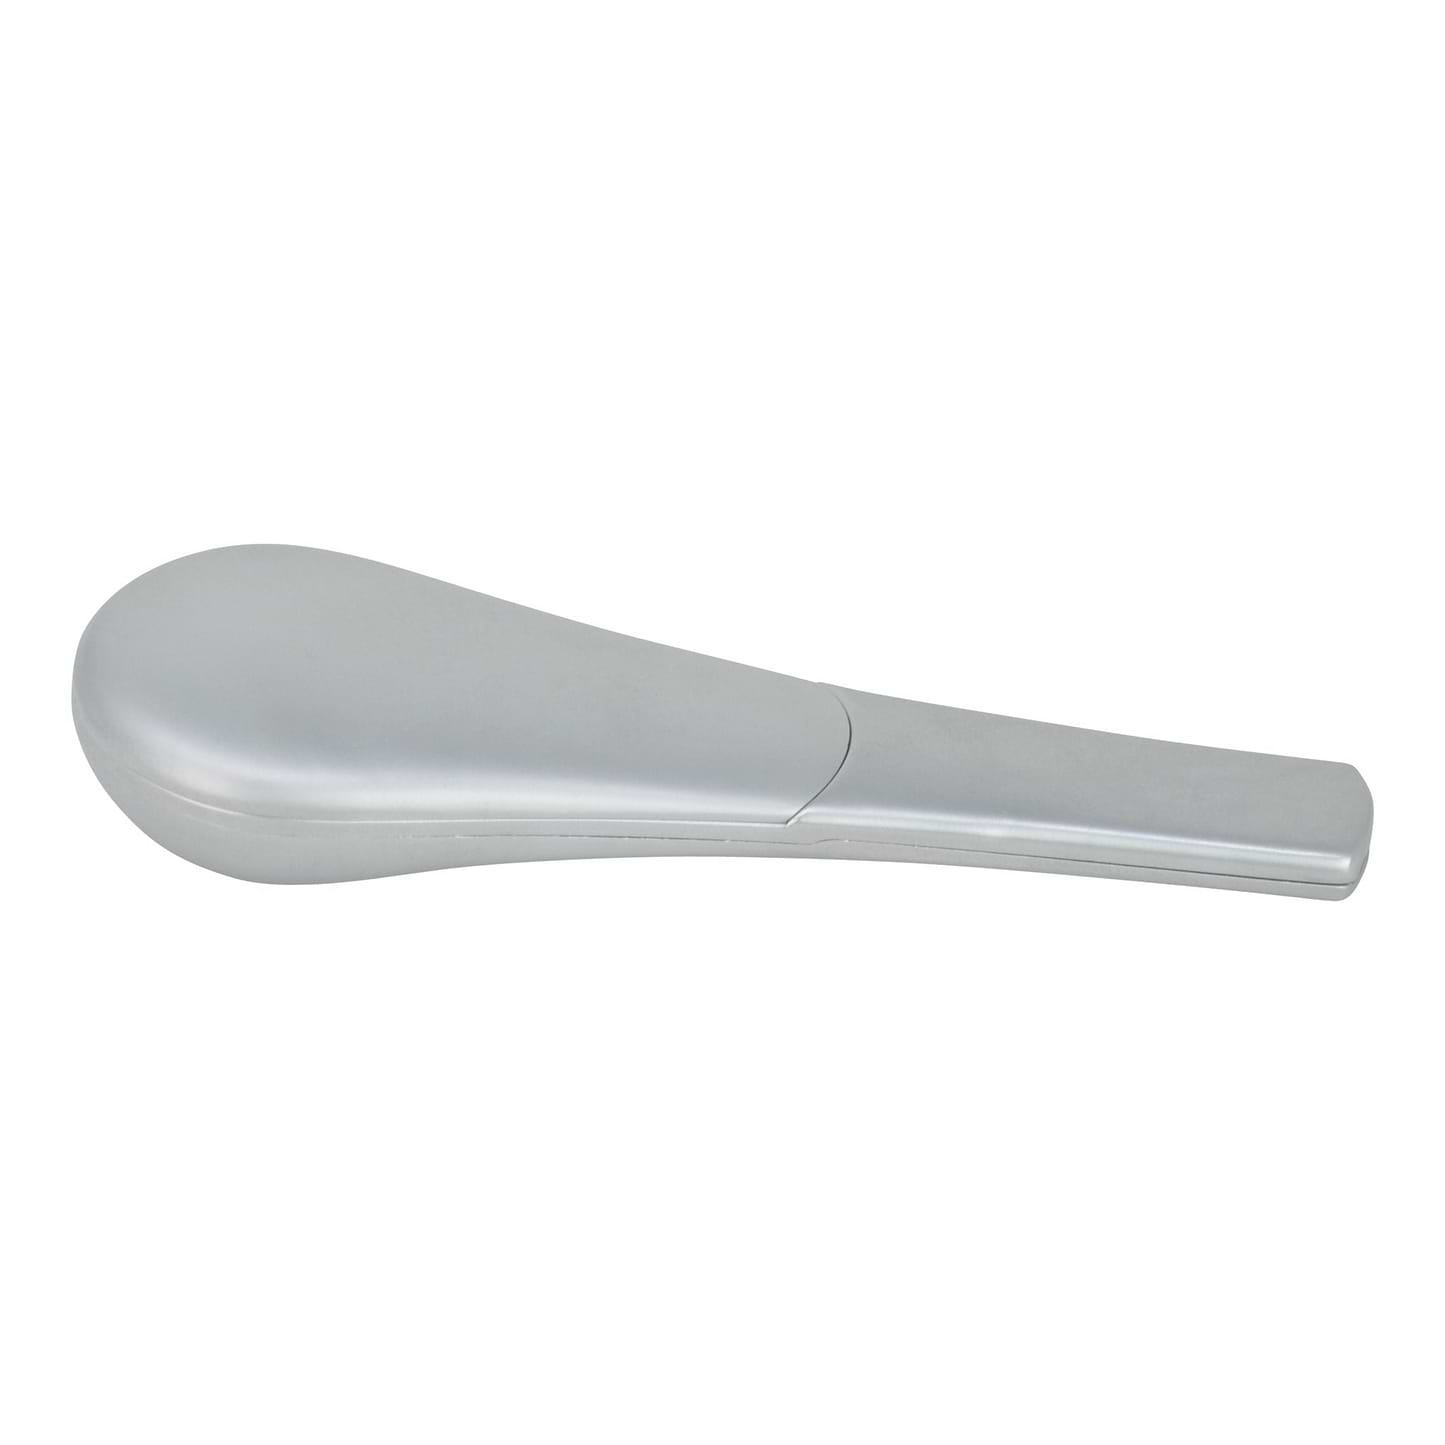 3.5 inch magnetic travel hand pipe in a discreet spoon shape in stylish metallic silver in an elegant case